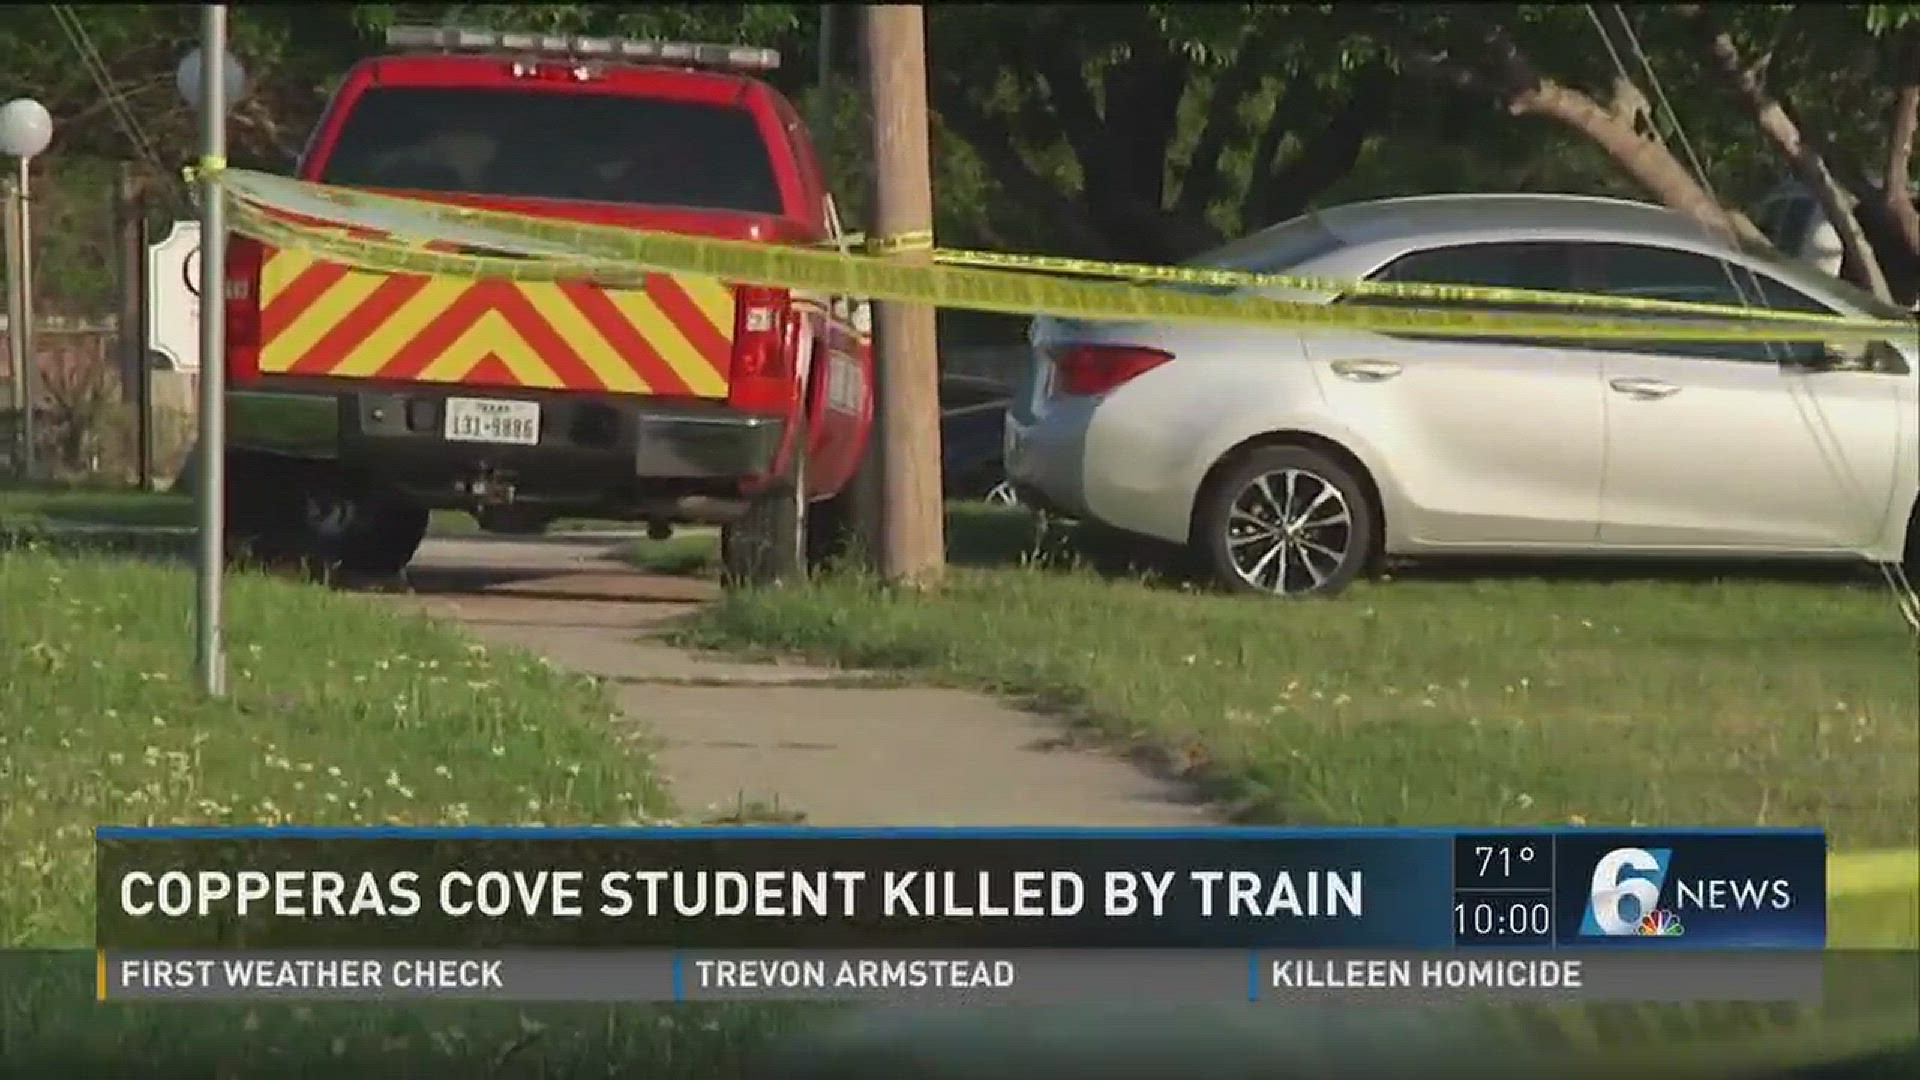 A teenage boy is dead after being hit by a train in Copperas Cove.